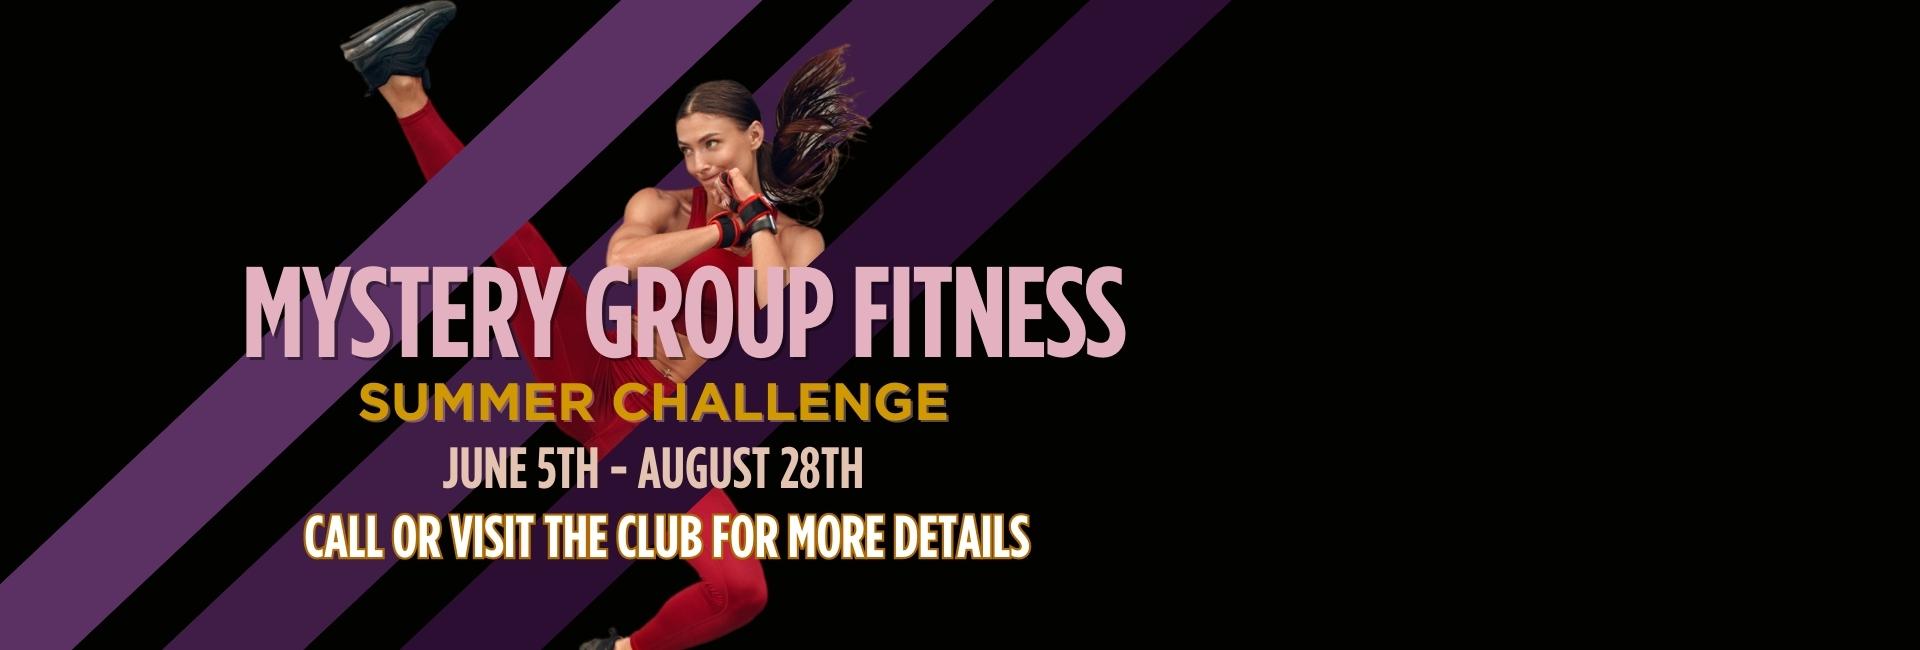 Best Gym Peak MYSTERY GROUP FITNESS Challenge